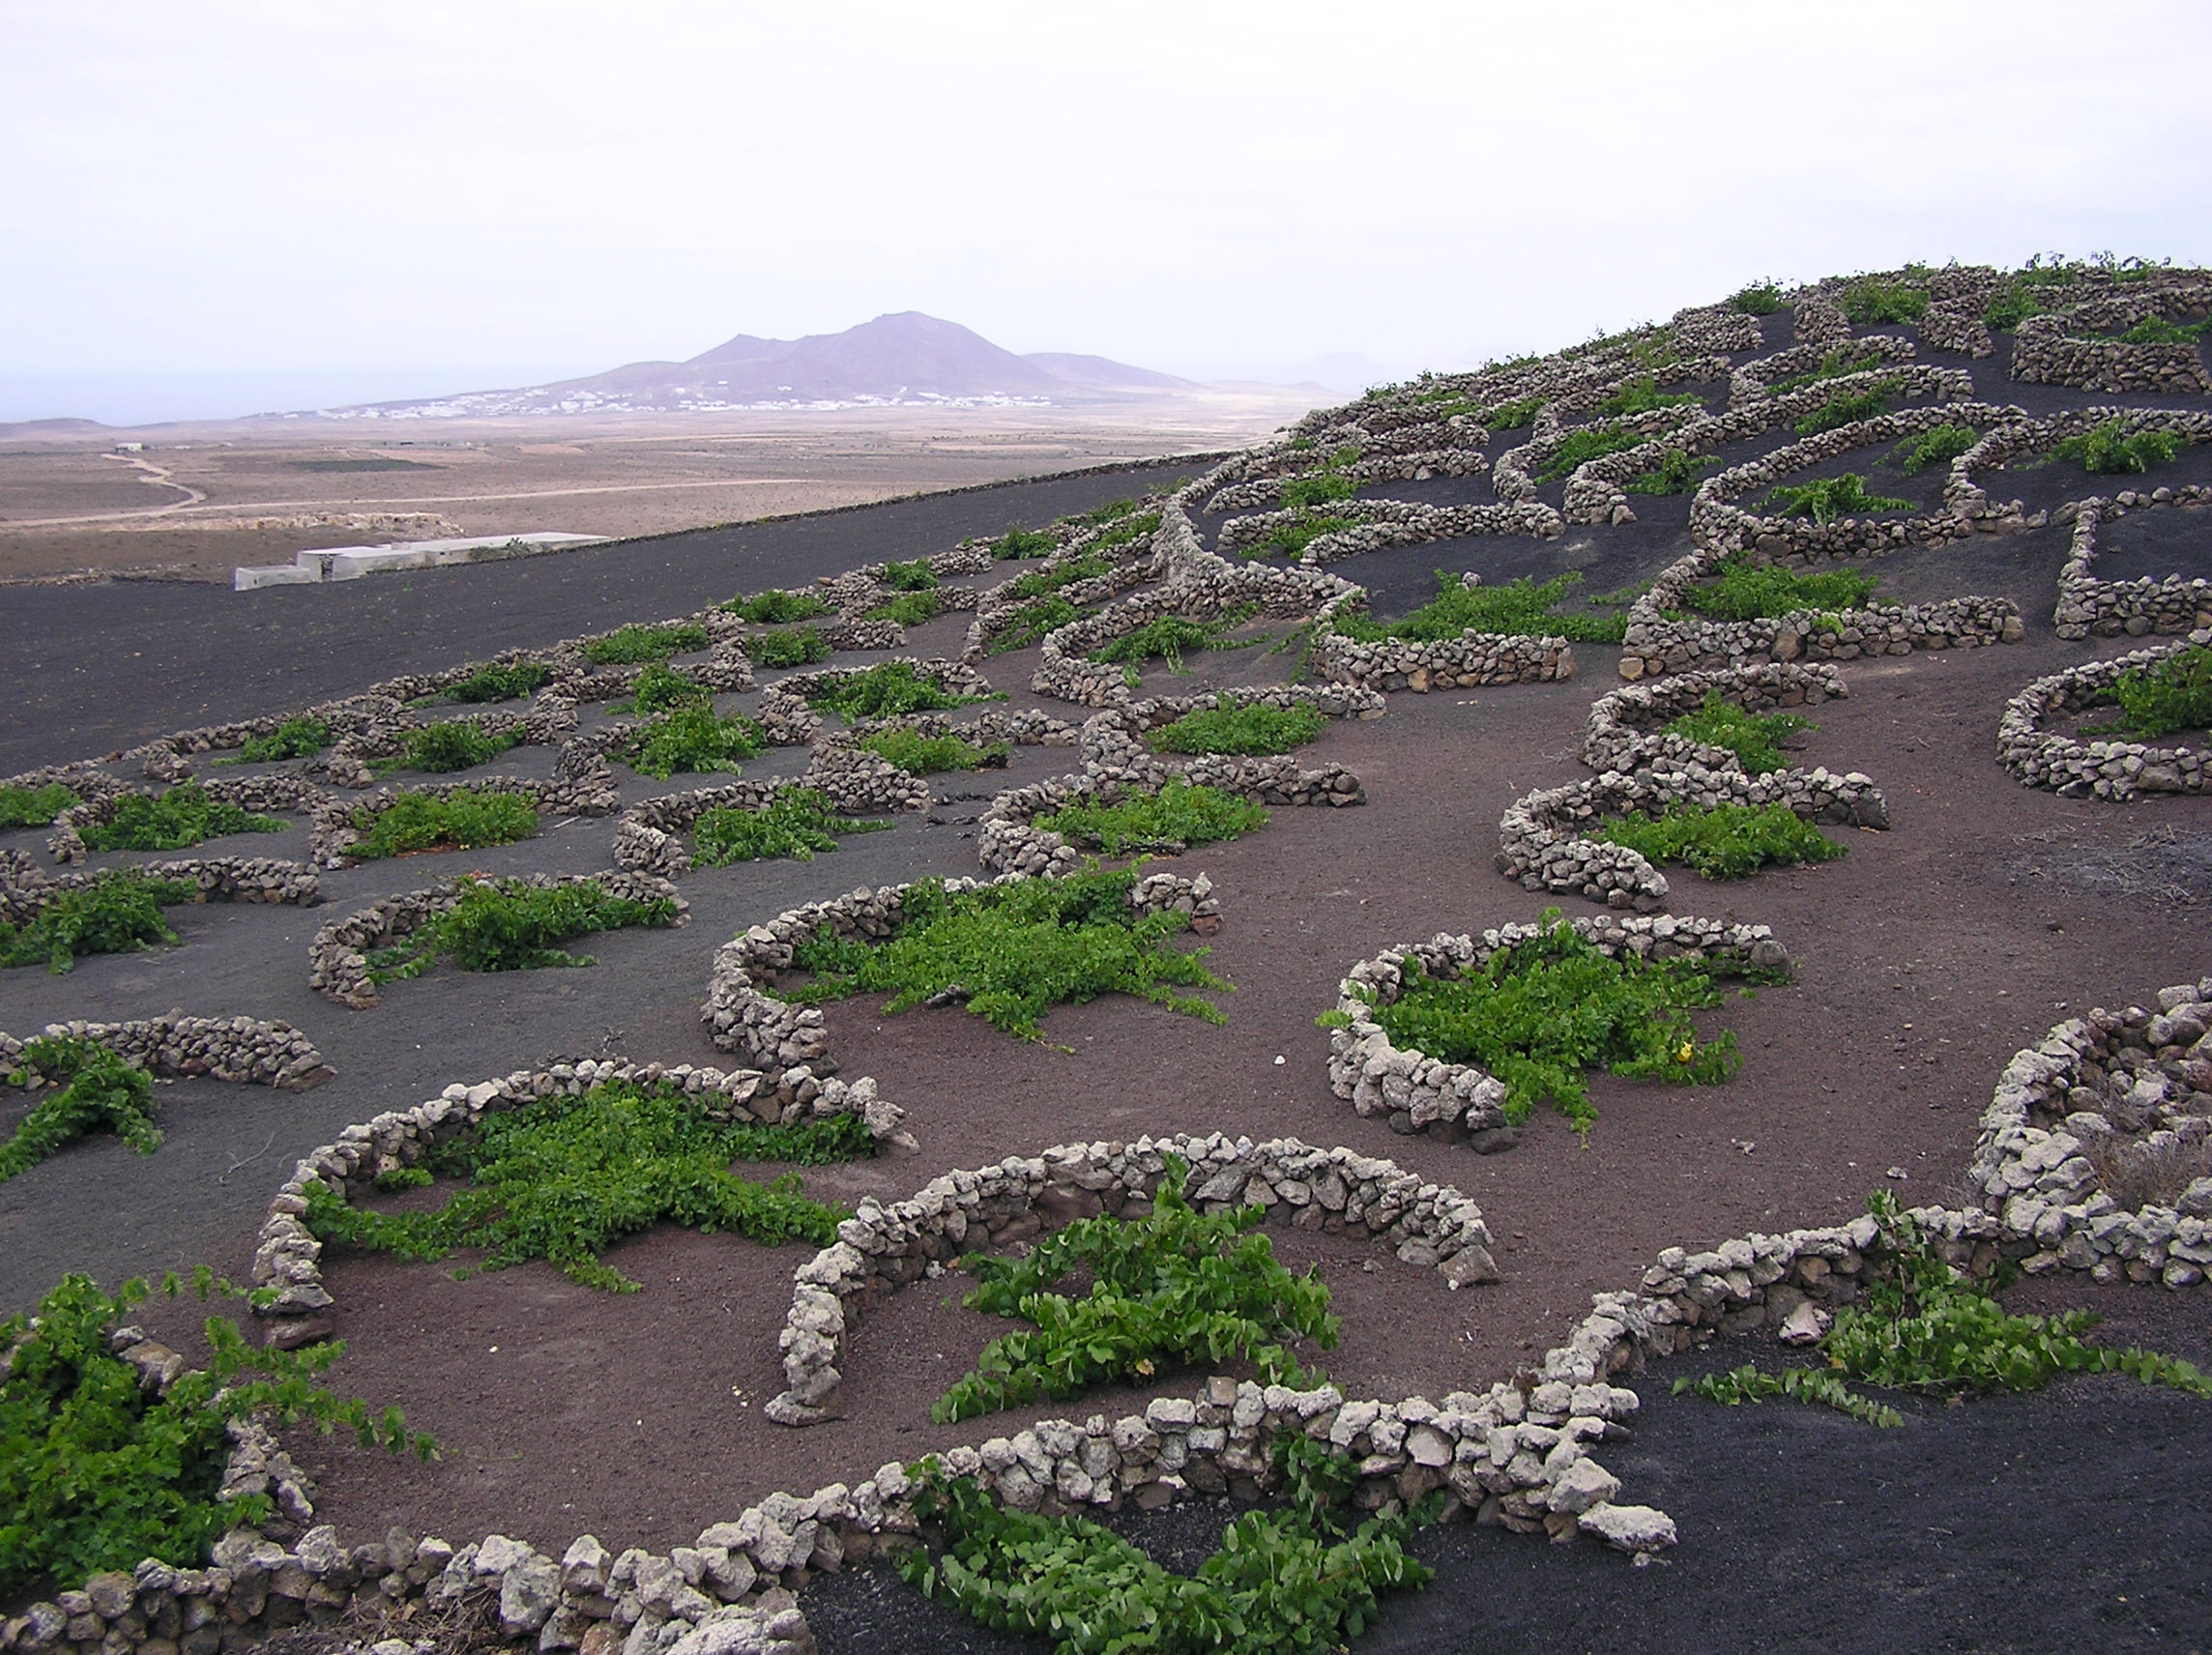 Malvasia grape vines growing in topsoil, covered in lapilli, La Geria, Lanzarote, Canary Islands. The low, curved walls protect the vines from the constant, drying wind. Photo taken in July 2006.